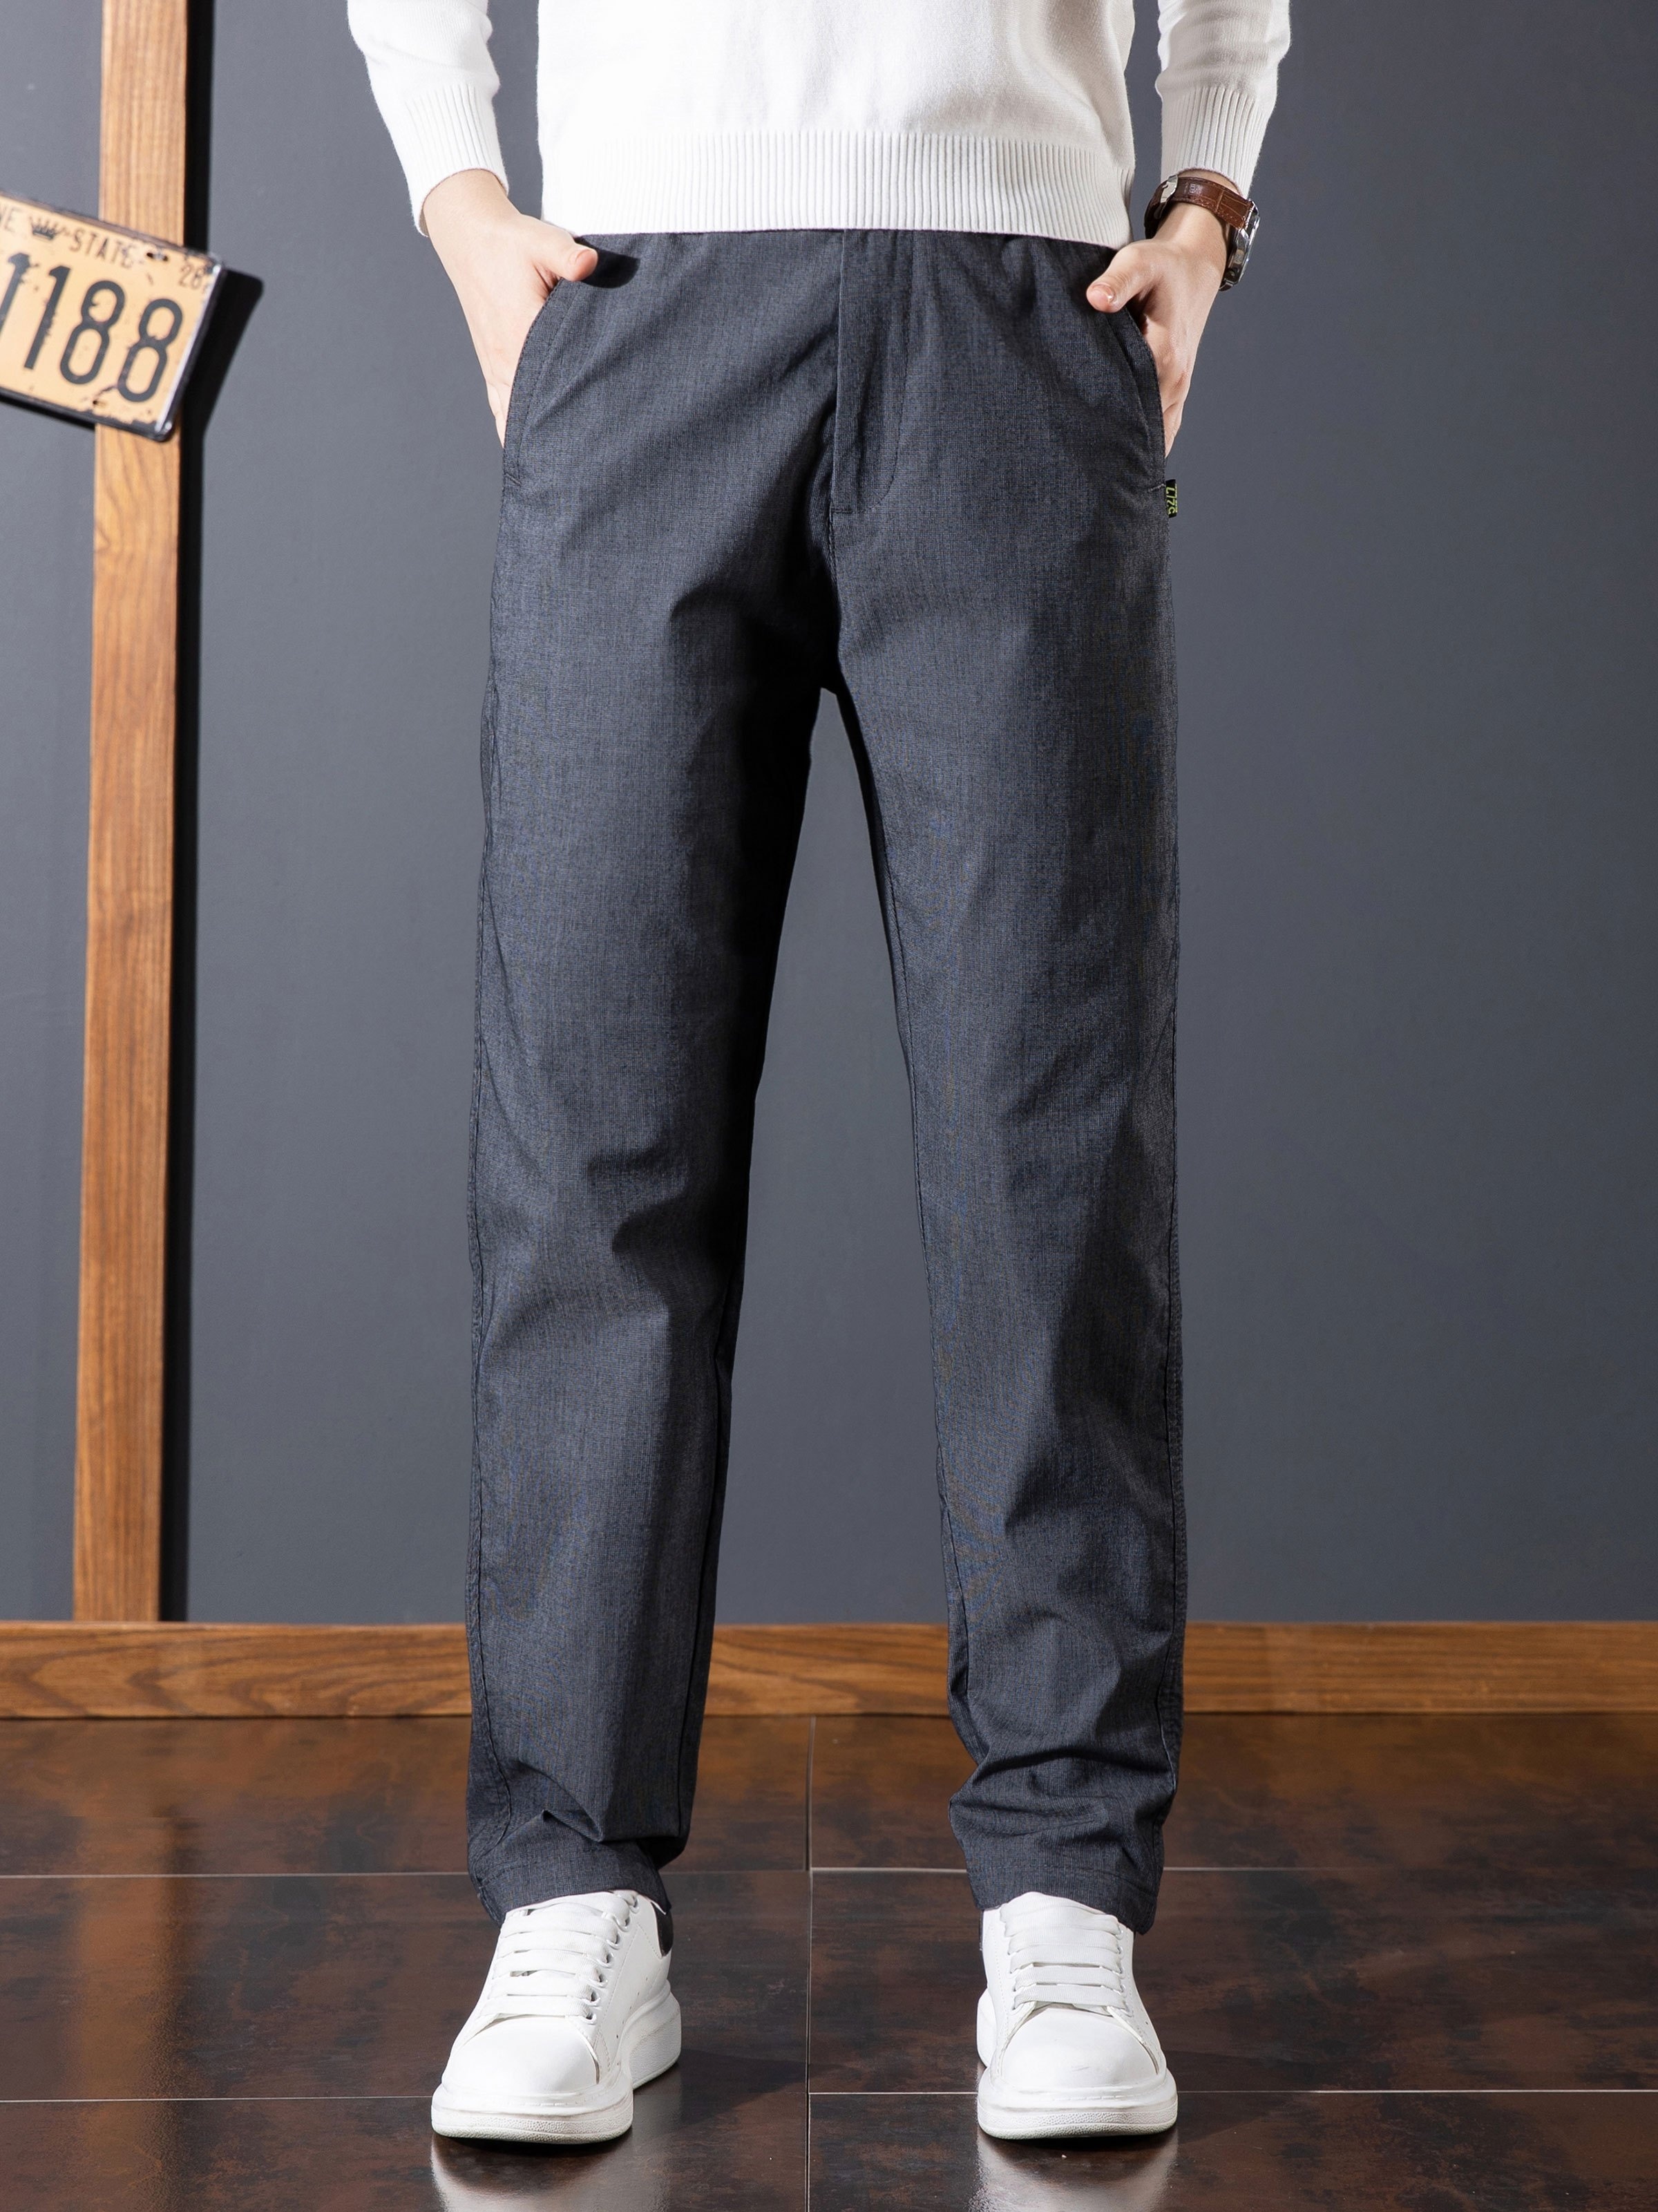 Plus Size Men's Casual Pants Solid Suit Trousers Spring Fall